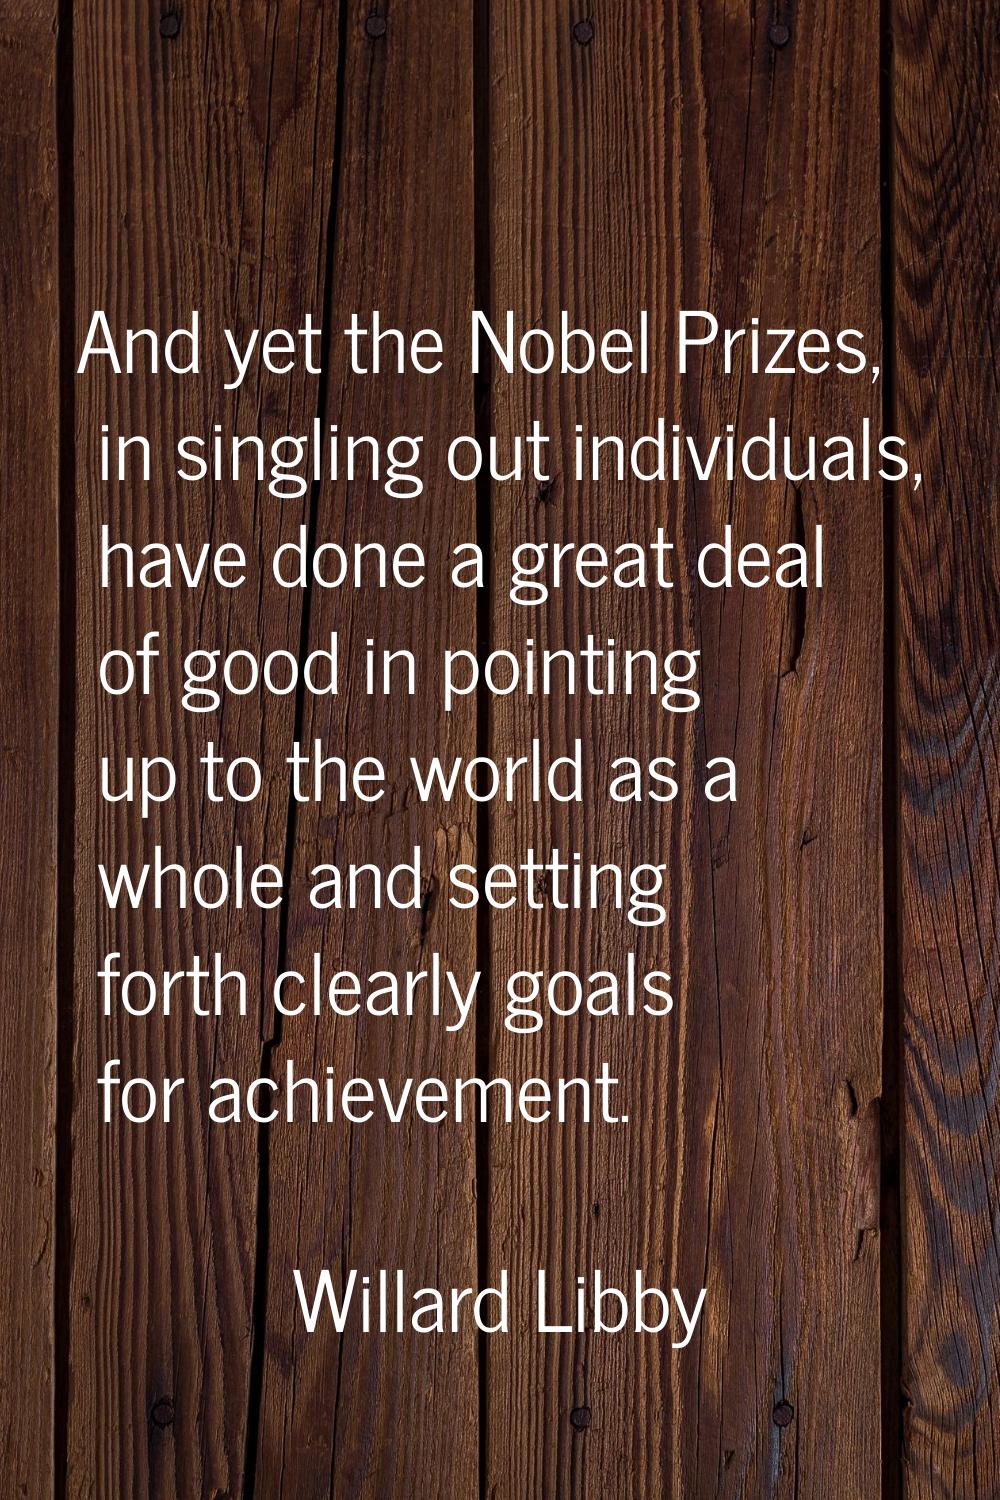 And yet the Nobel Prizes, in singling out individuals, have done a great deal of good in pointing u